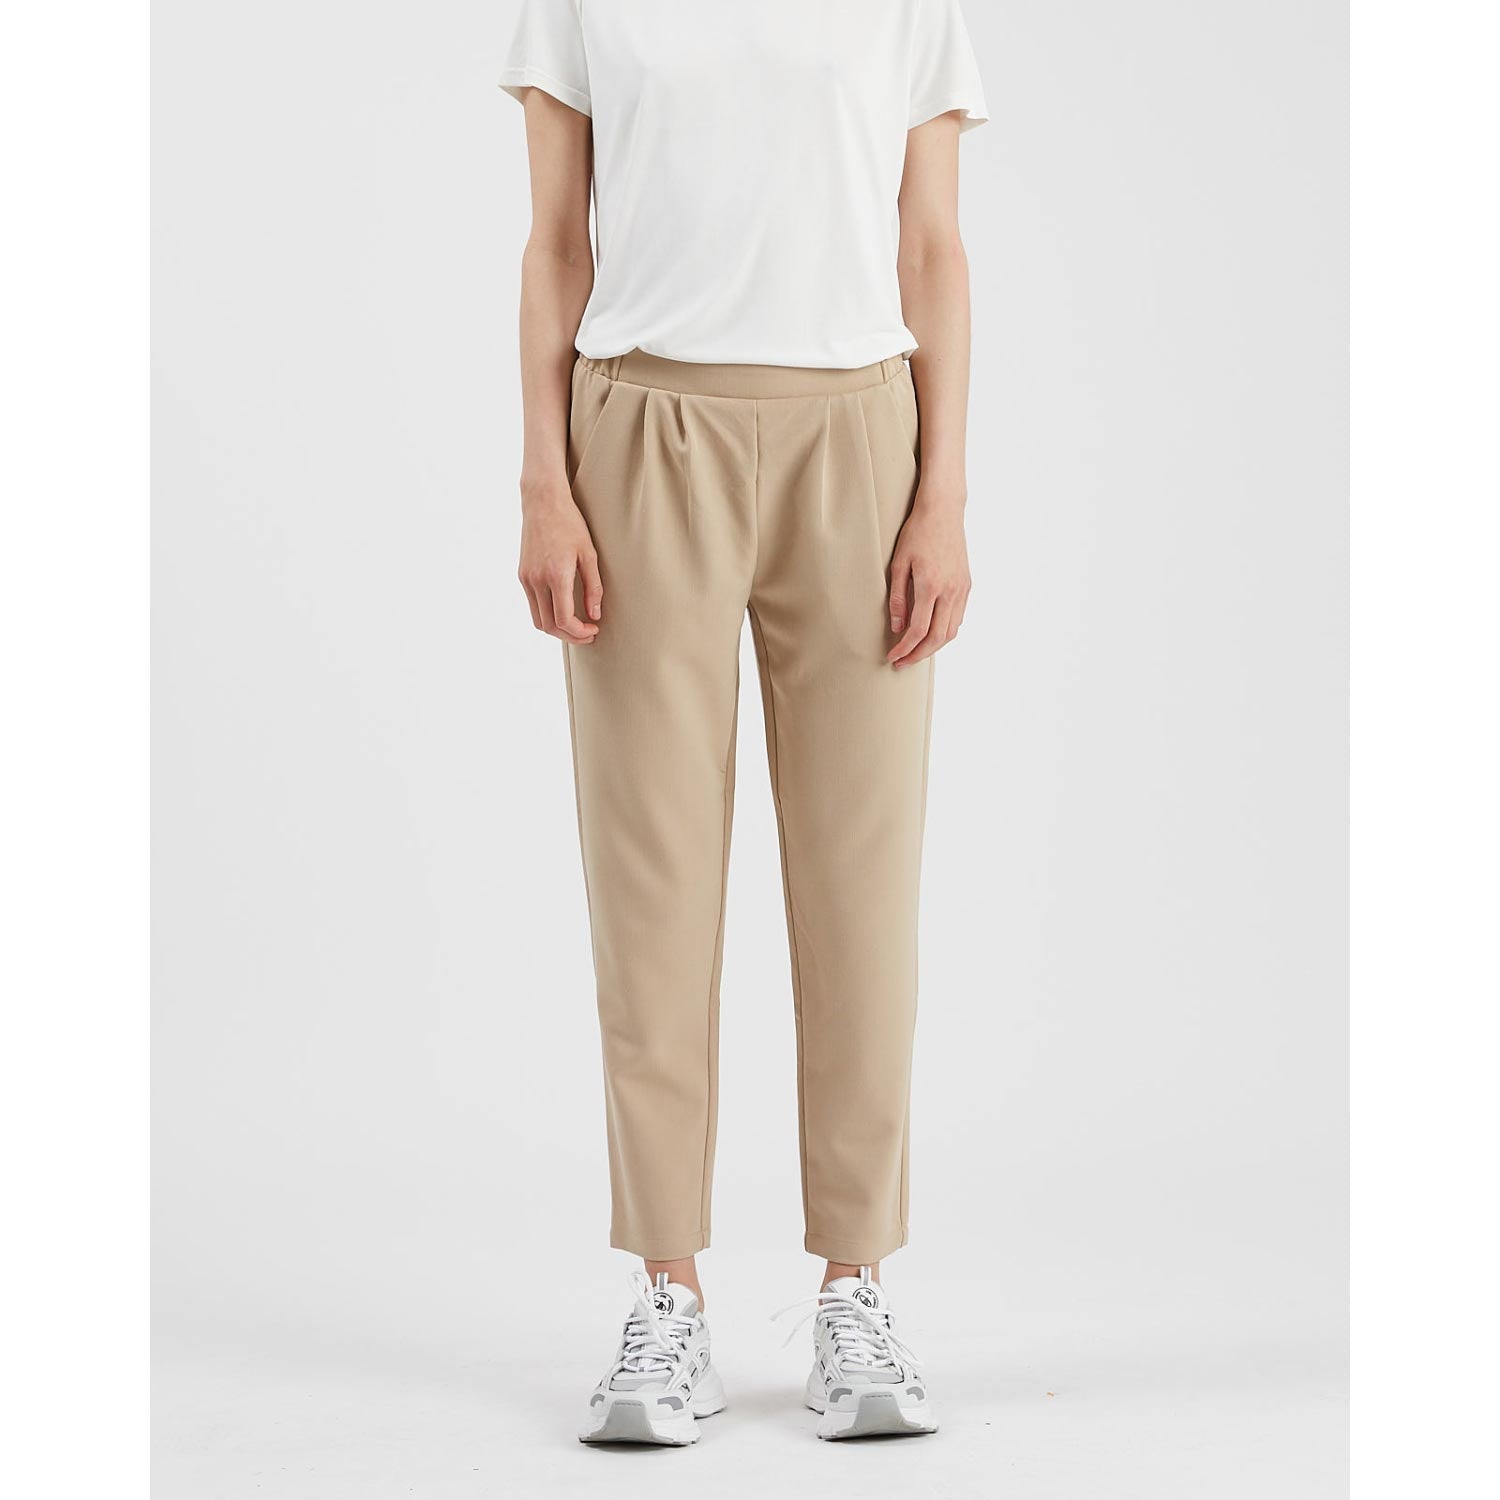 BUIgtTklOP Pants For Women Clearance Casual Temperament Solid